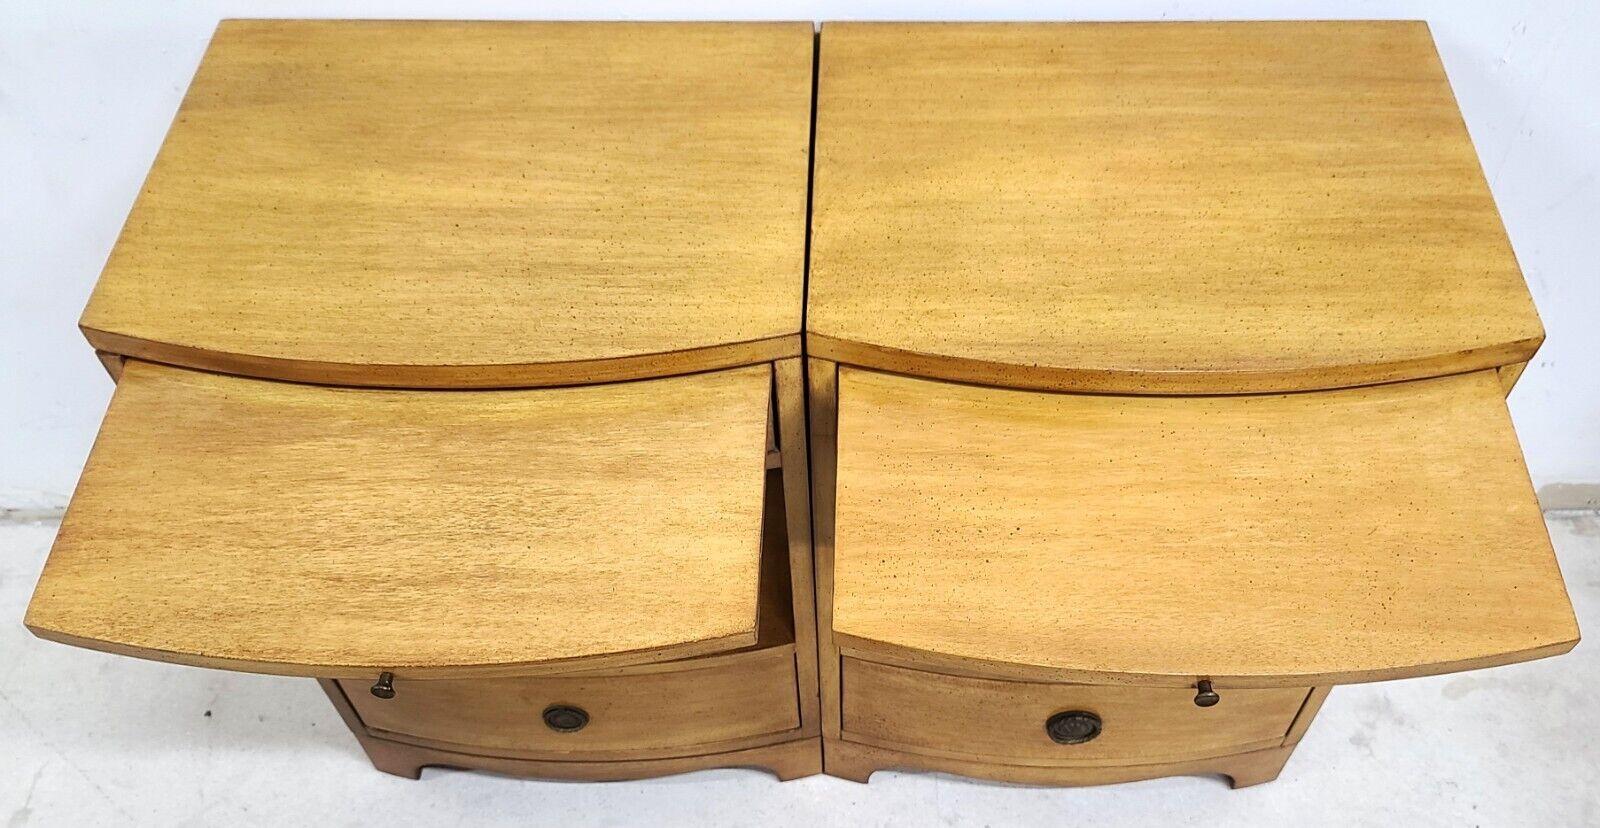 For FULL item description be sure to click on CONTINUE READING at the bottom of this listing.

Offering One Of Our Recent Palm Beach Estate Fine Furniture Acquisitions Of A Pair of Vintage Mid Century Modern Mahogany Nightstands by SLIGH
With